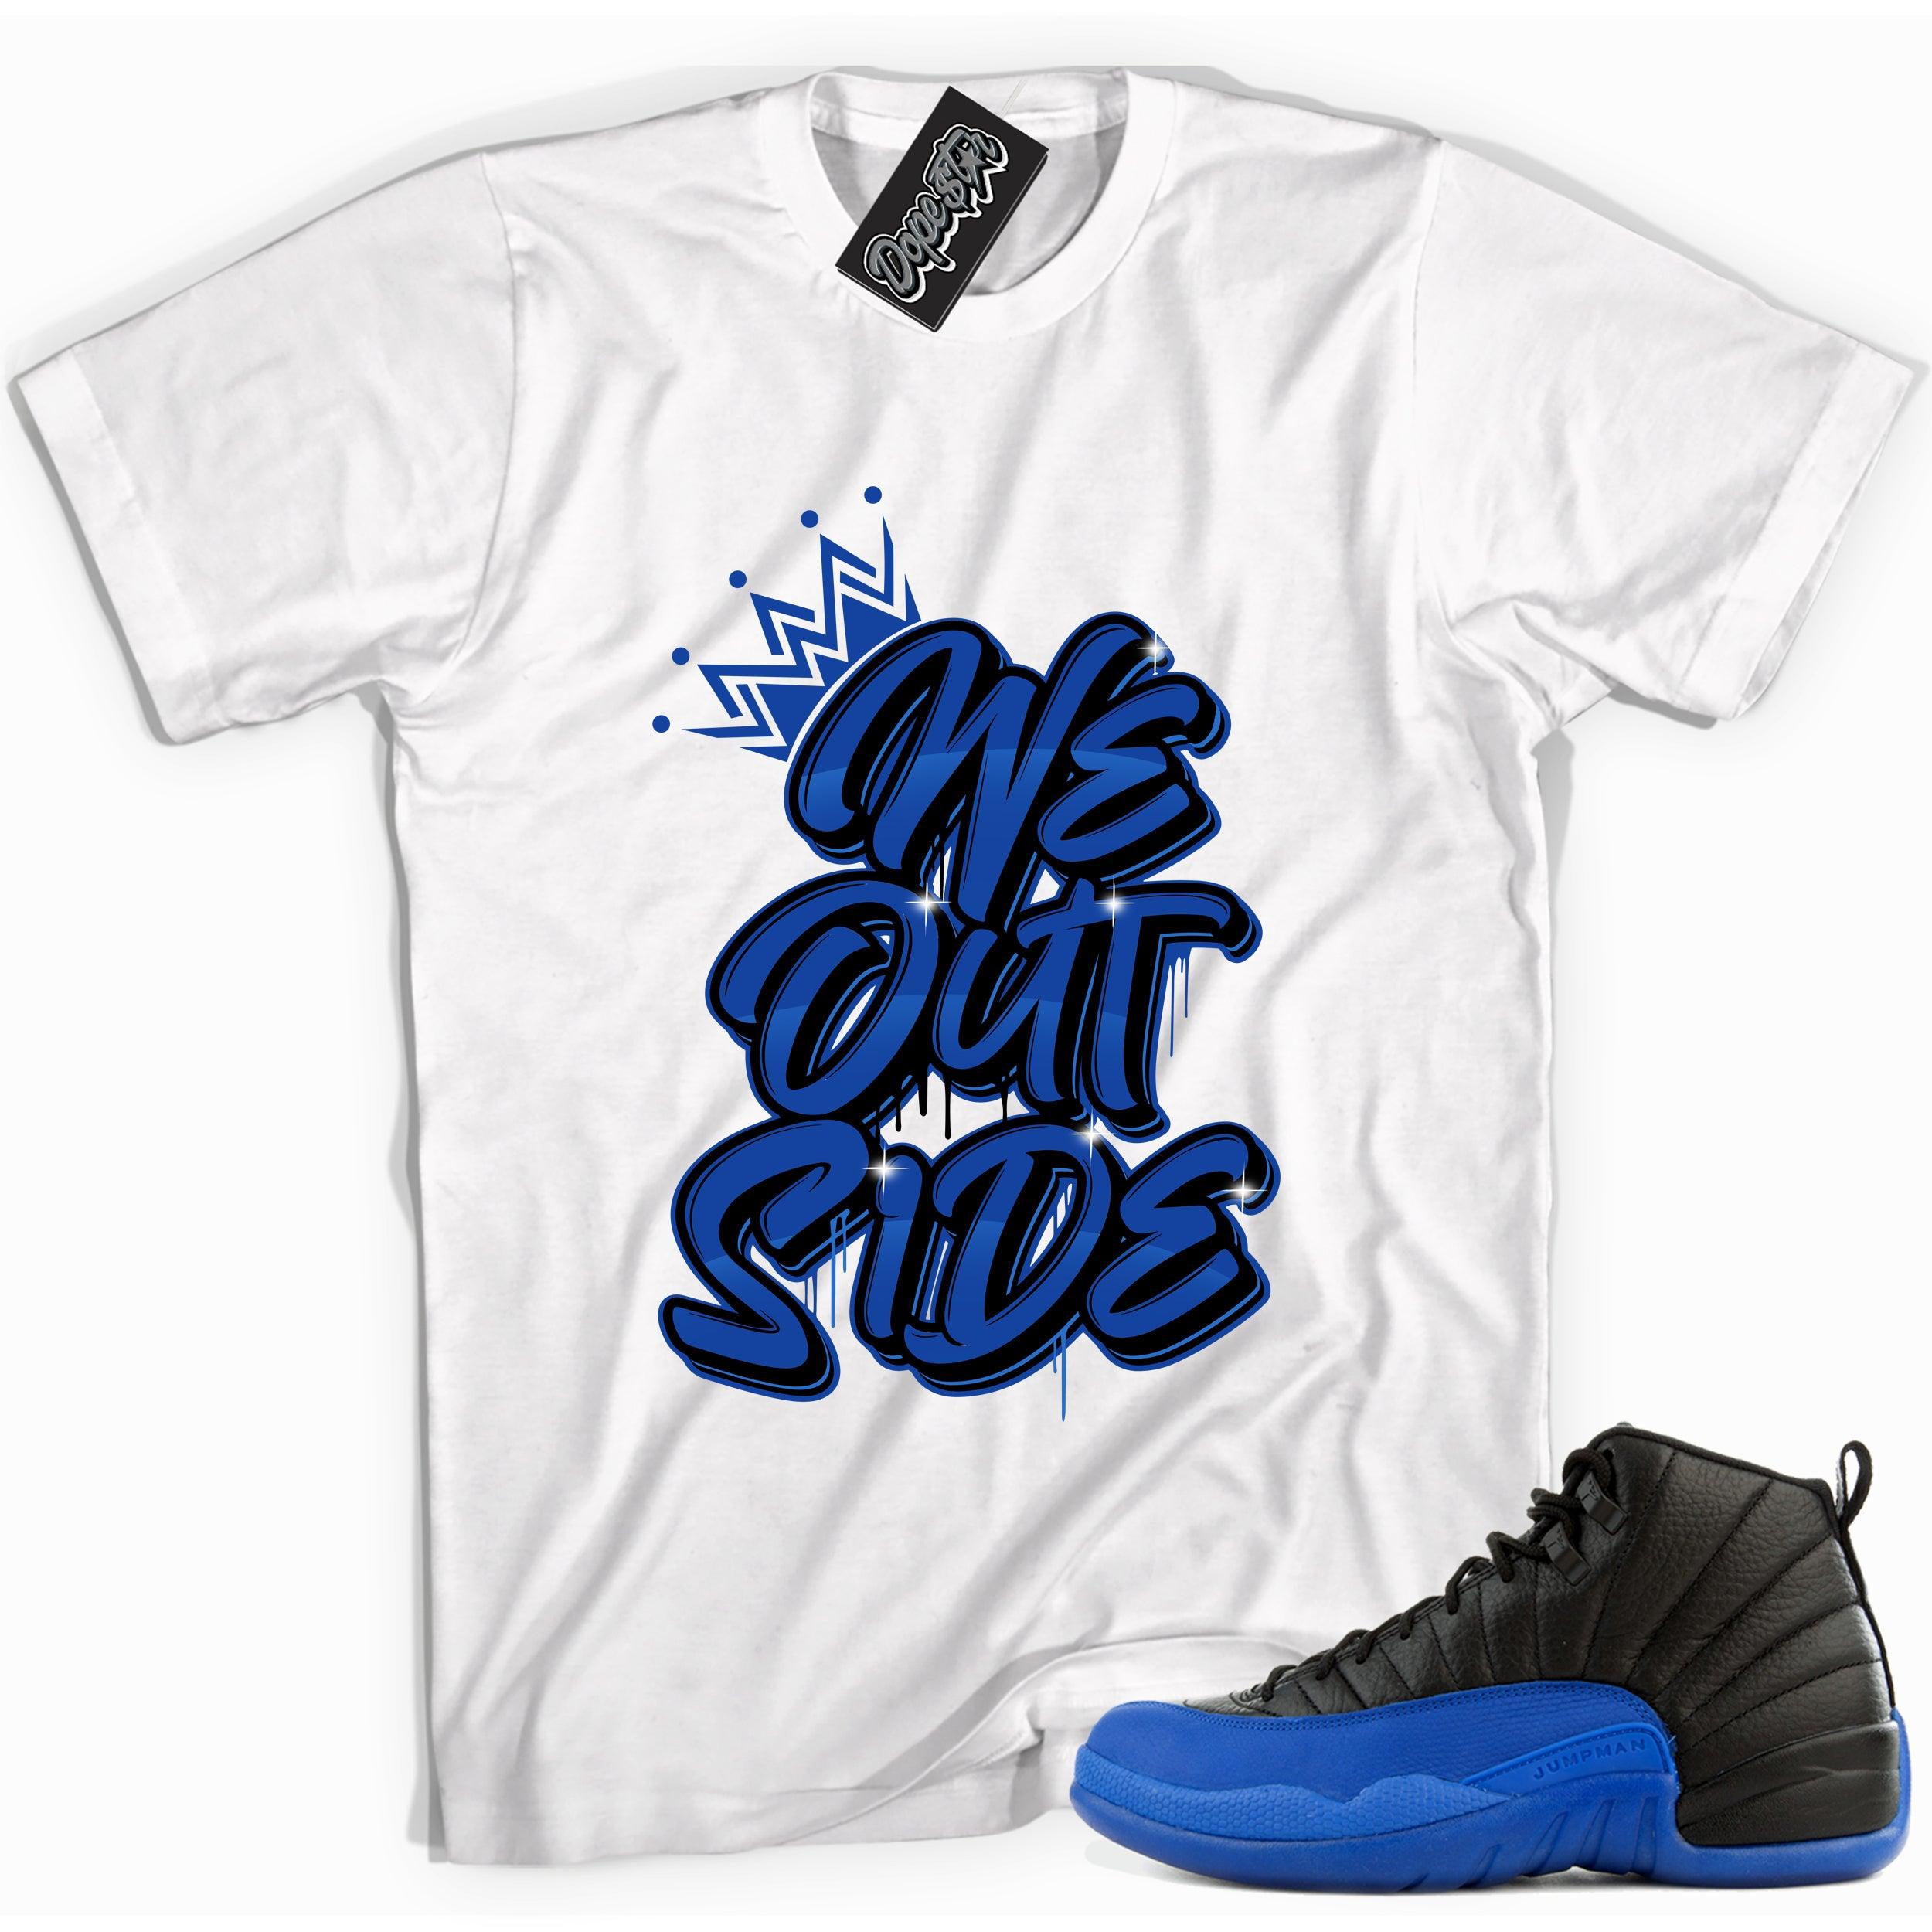 Cool white graphic tee with 'we outside' print, that perfectly matches Air Jordan 12 Retro Black Game Royal sneakers.